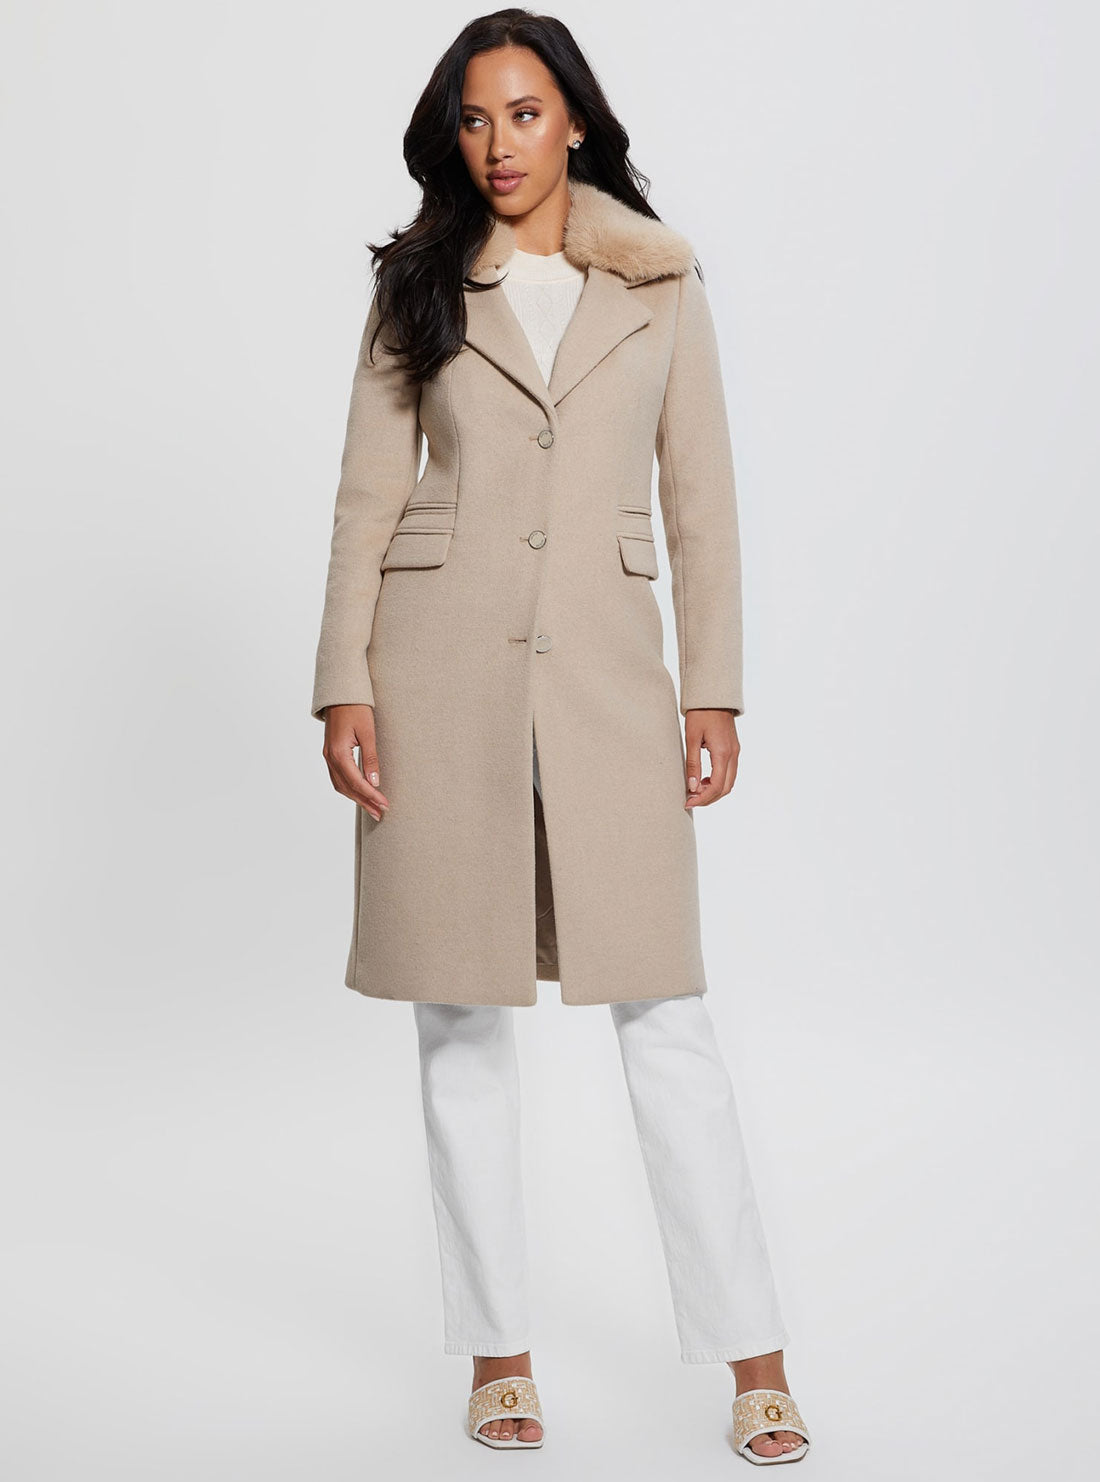 GUESS Eco Beige New Laurence Coat full view